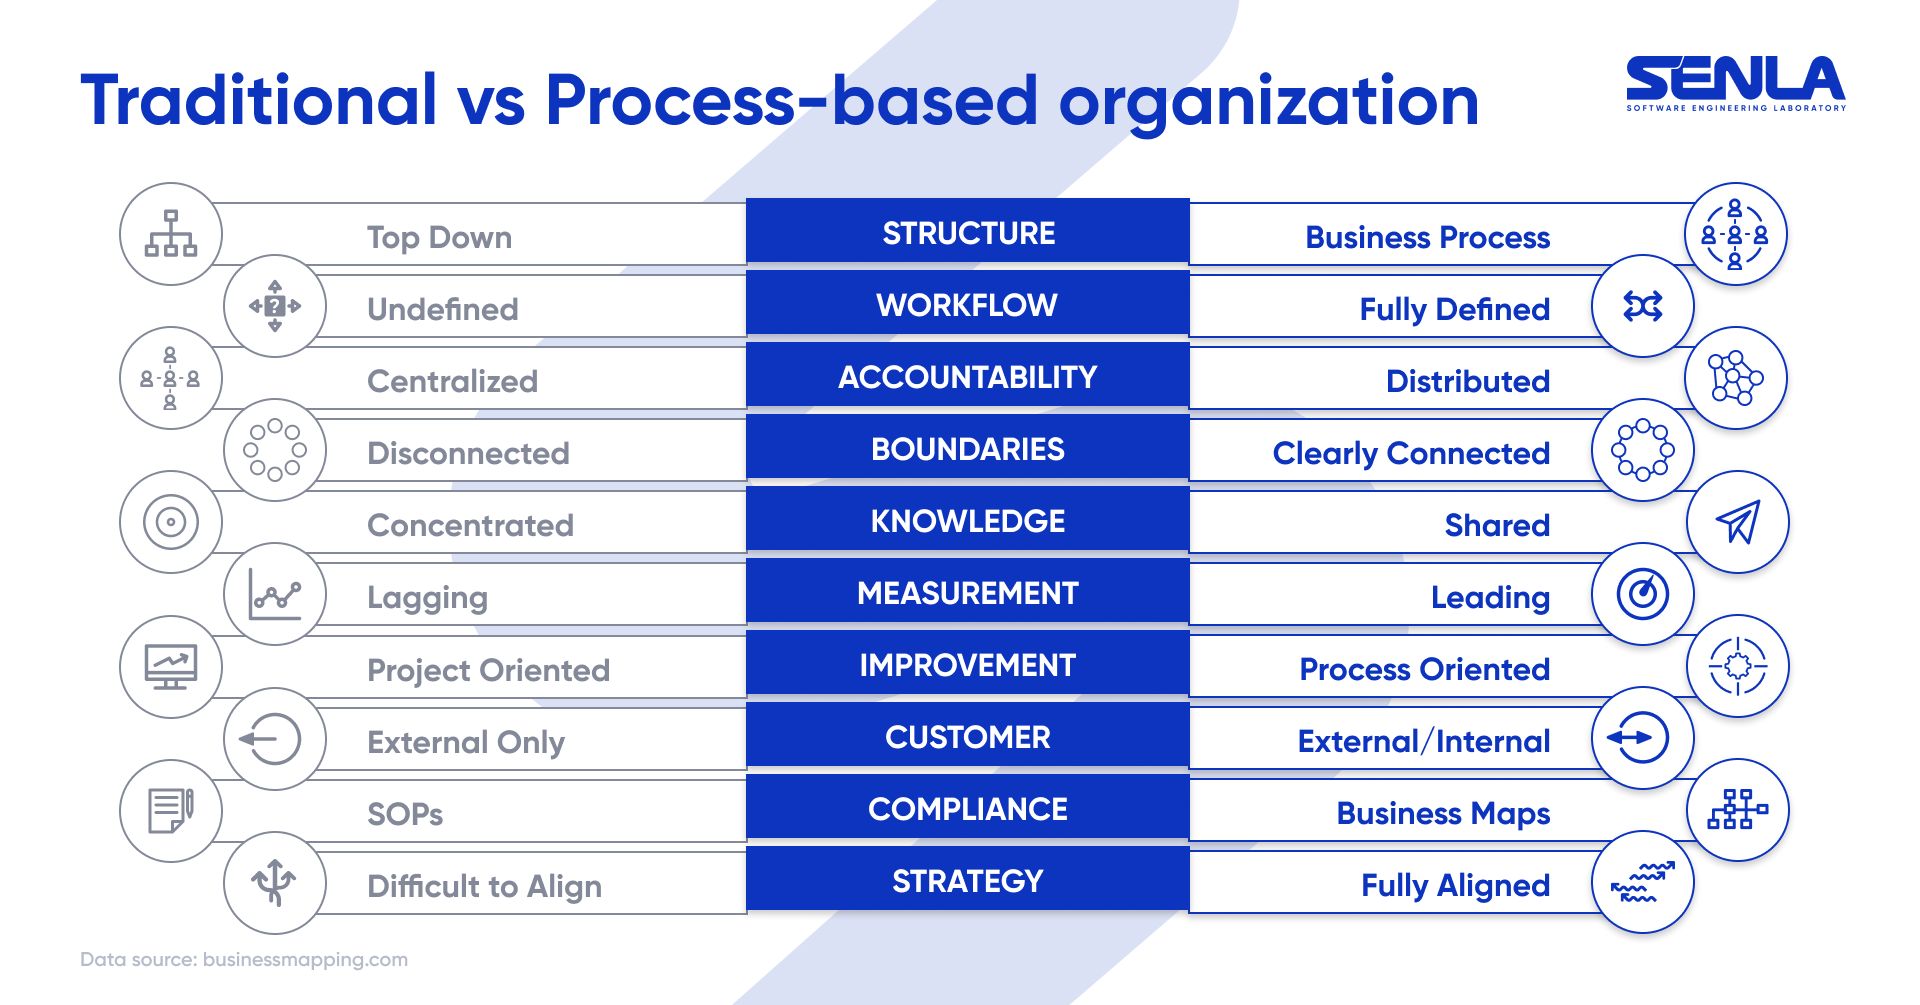 The difference between traditional organization and process-based